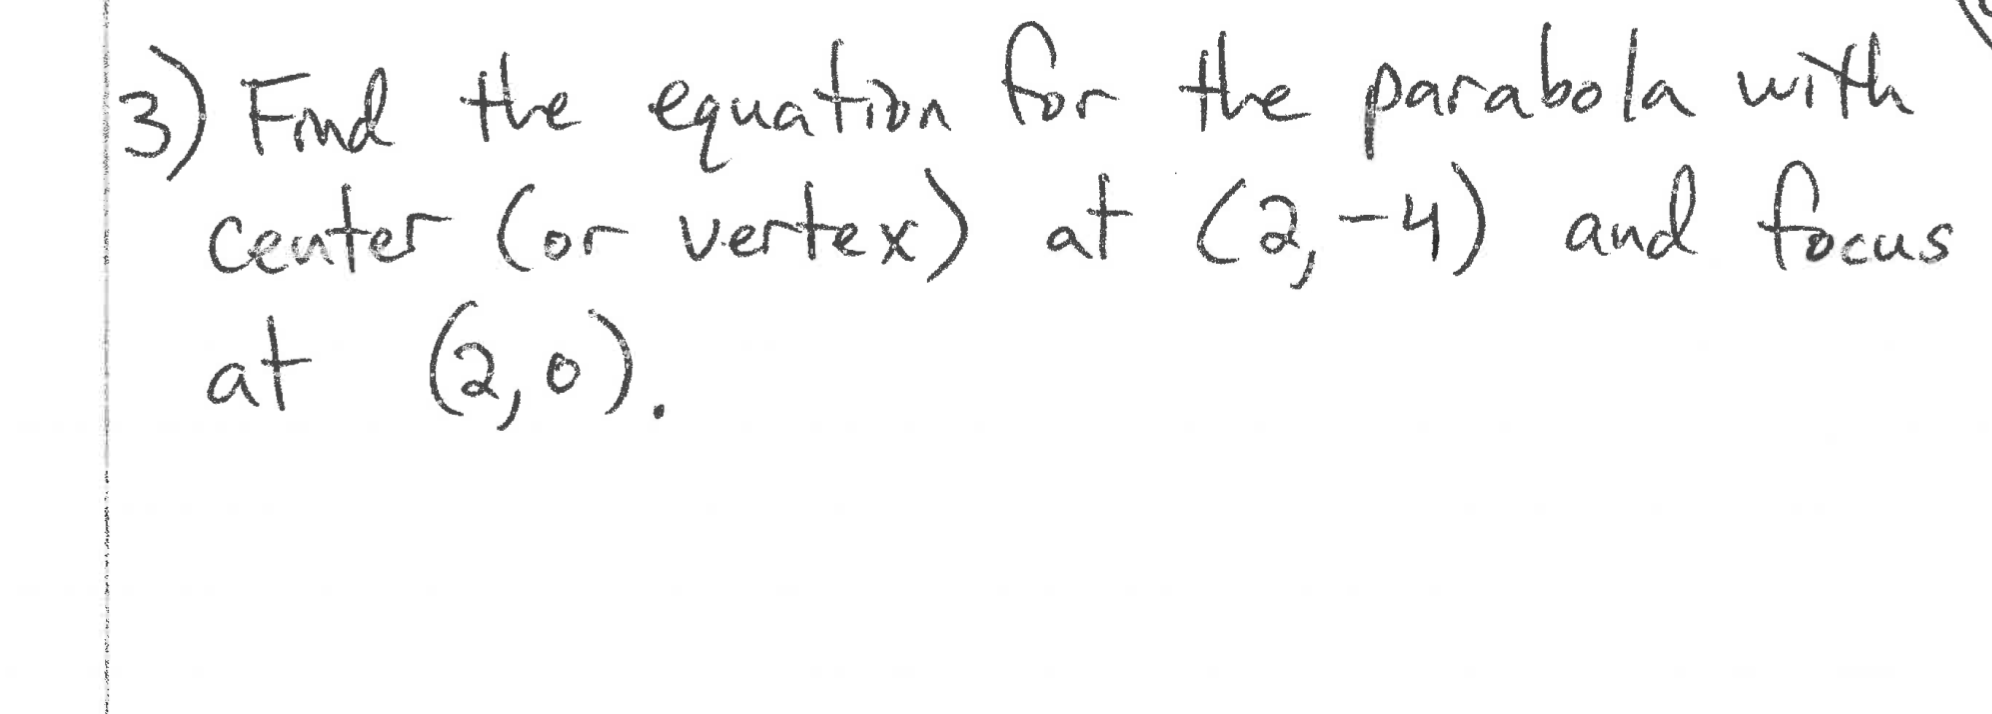 Find the equation Gr the parabola with
center Cor vertex) at Ca,-4) and facus
at (2,0).
